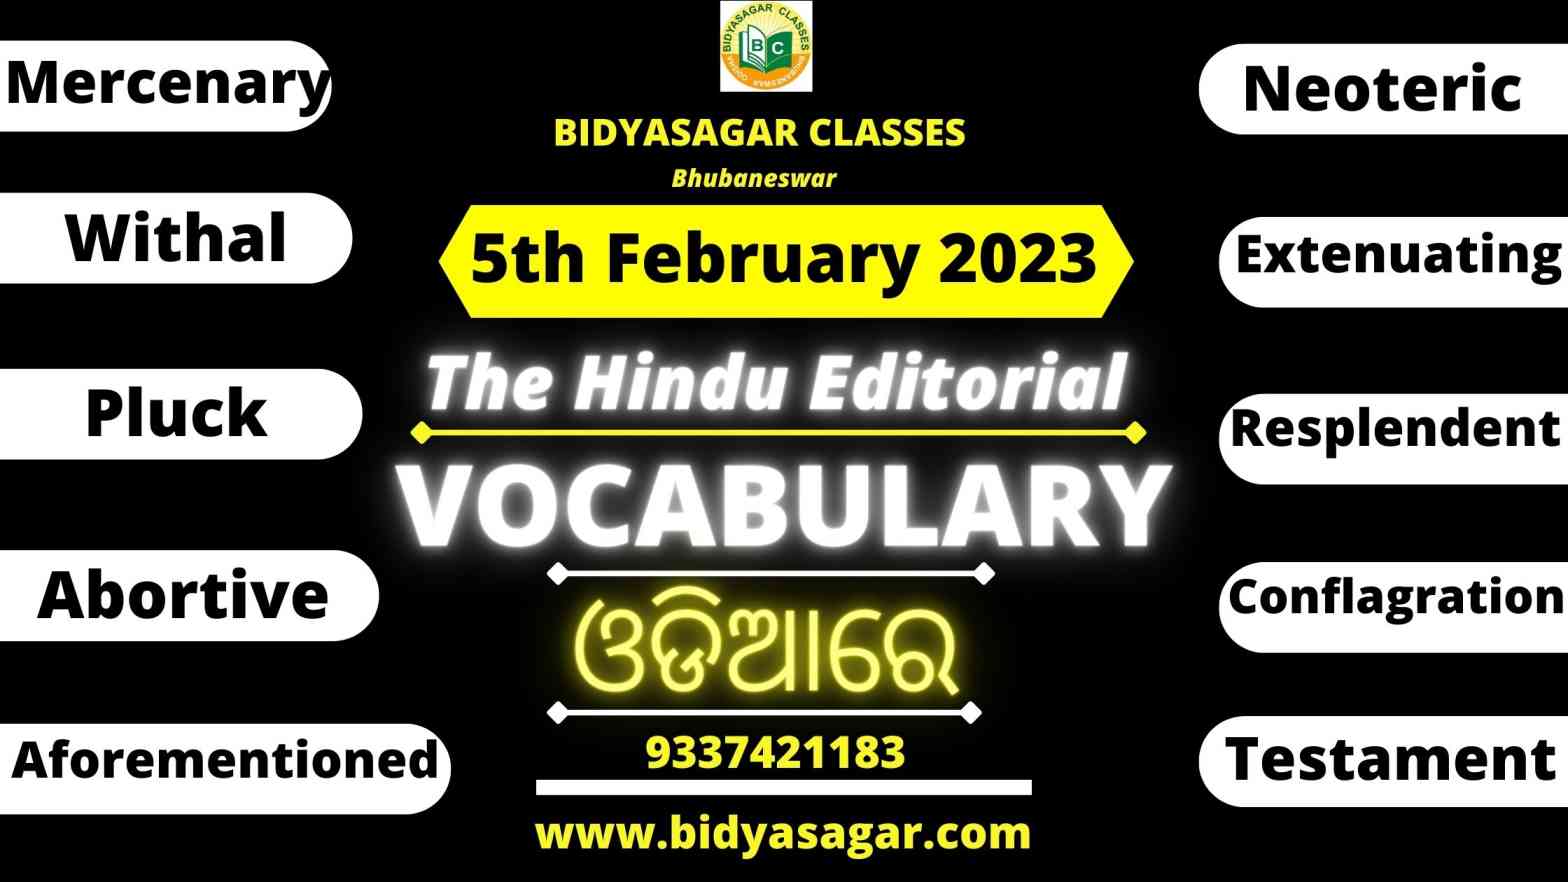 The Hindu Editorial Vocabulary of 5th February 2023